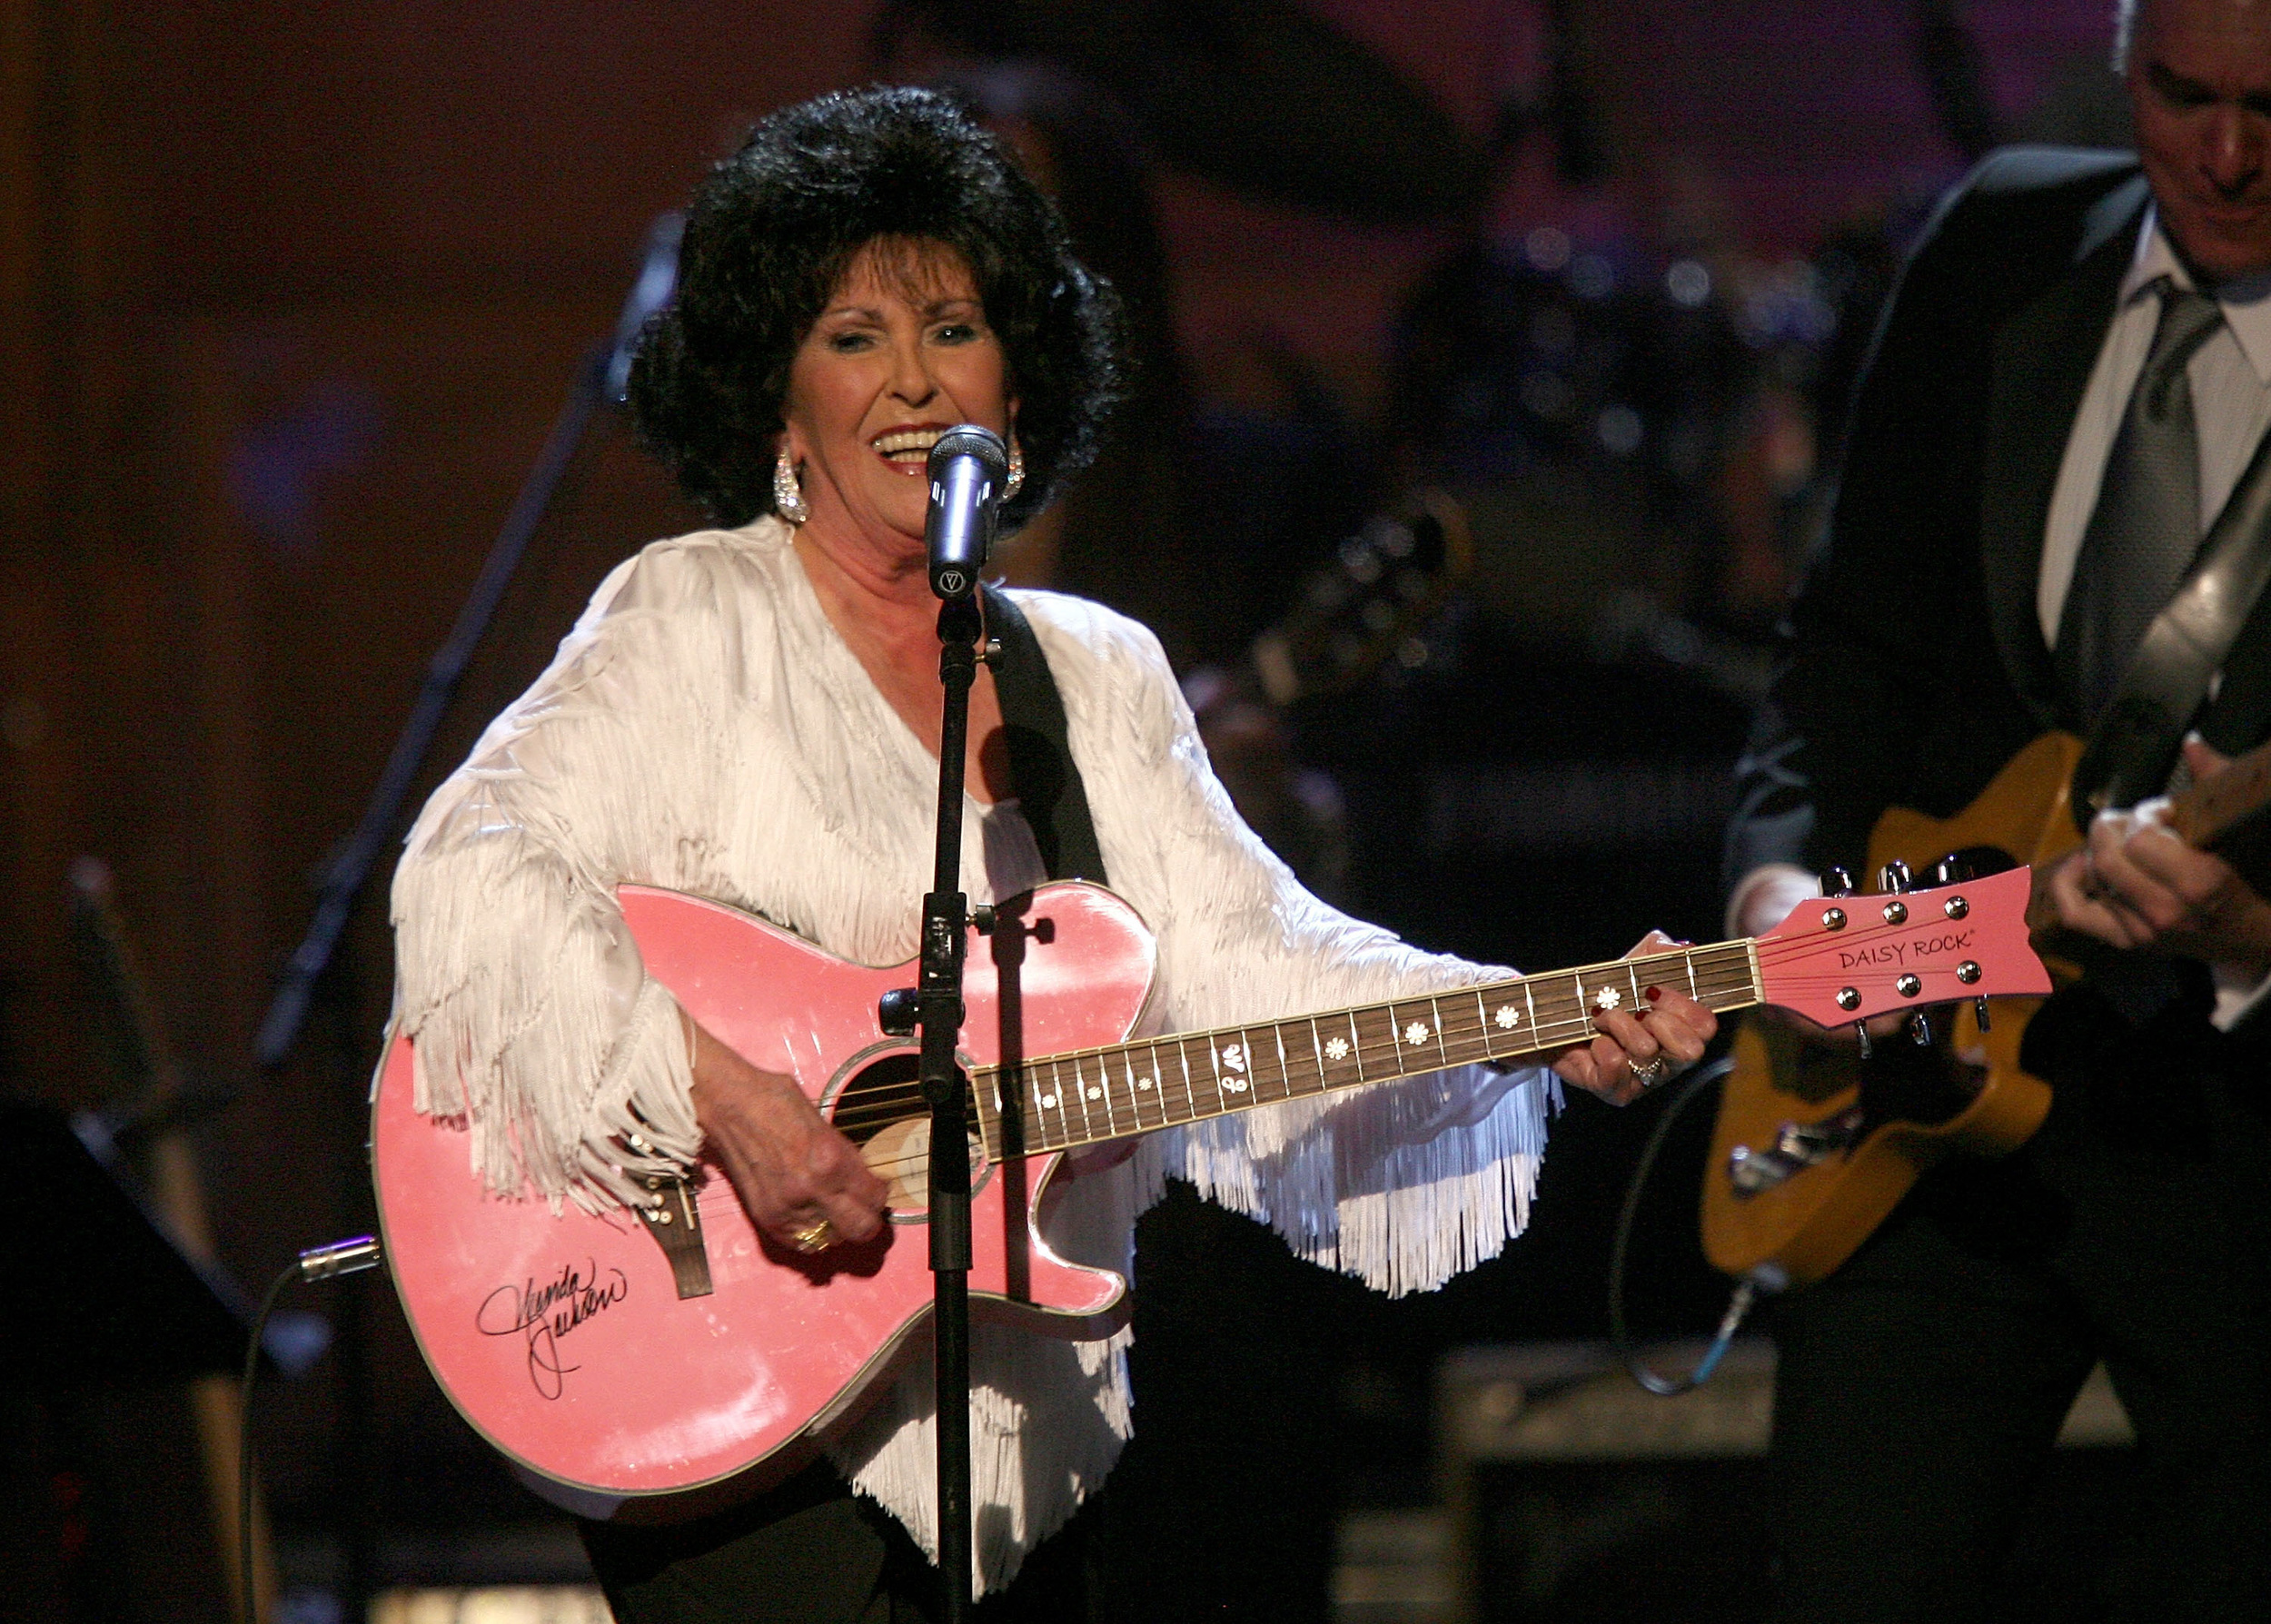 <p>The First Lady of Rockabilly, Ms. Wanda Jackson, has been recording music since the 1950s, when she came up alongside the legendary Elvis Presley. She’s responsible for bringing rockabilly influence to the mainstream with songs like “Fujiyama Mama,” and was a trailblazer for women in the genre who followed her, like Pam Tillis and Rosanne Cash. </p><p>You may also like: <a href='https://www.yardbarker.com/entertainment/articles/25_members_of_famous_bands_who_deserve_more_love/s1__33036248'>25 members of famous bands who deserve more love</a></p>